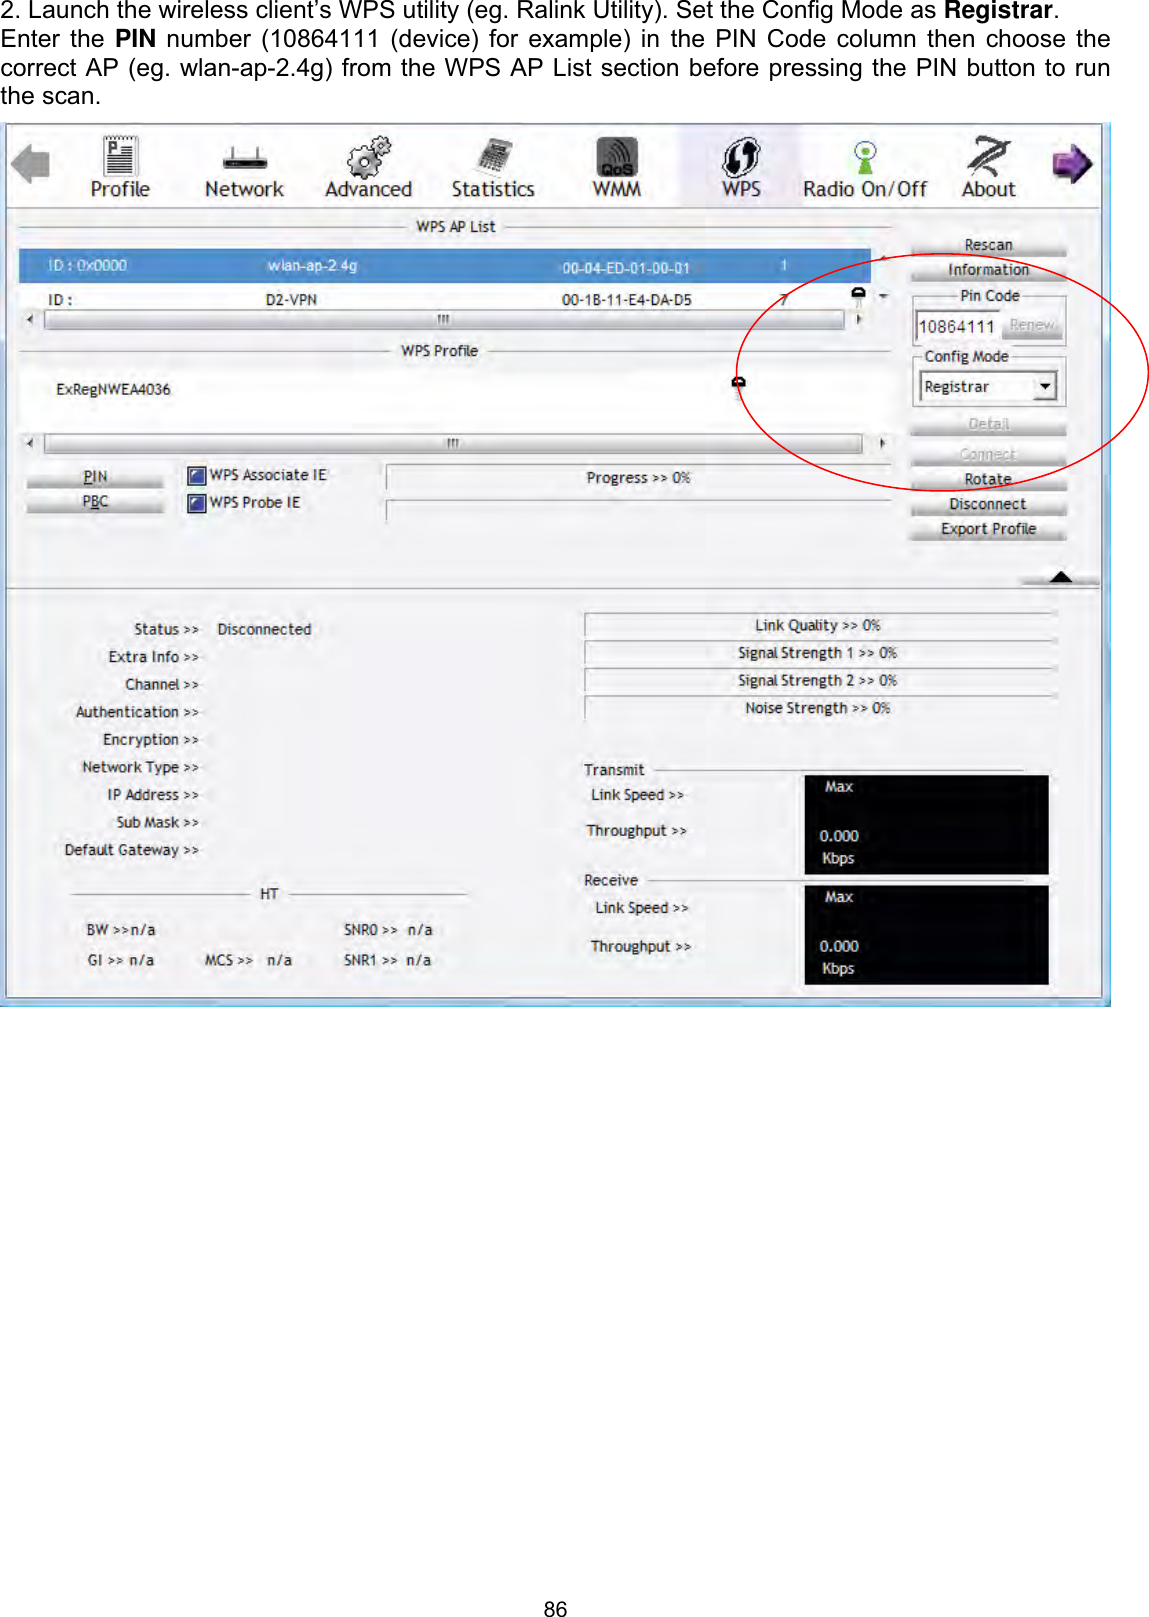 862. Launch the wireless client’s WPS utility (eg. Ralink Utility). Set the Config Mode as Registrar.Enter the PIN number (10864111 (device) for example) in the PIN Code column then choose the correct AP (eg. wlan-ap-2.4g) from the WPS AP List section before pressing the PIN button to run the scan. 